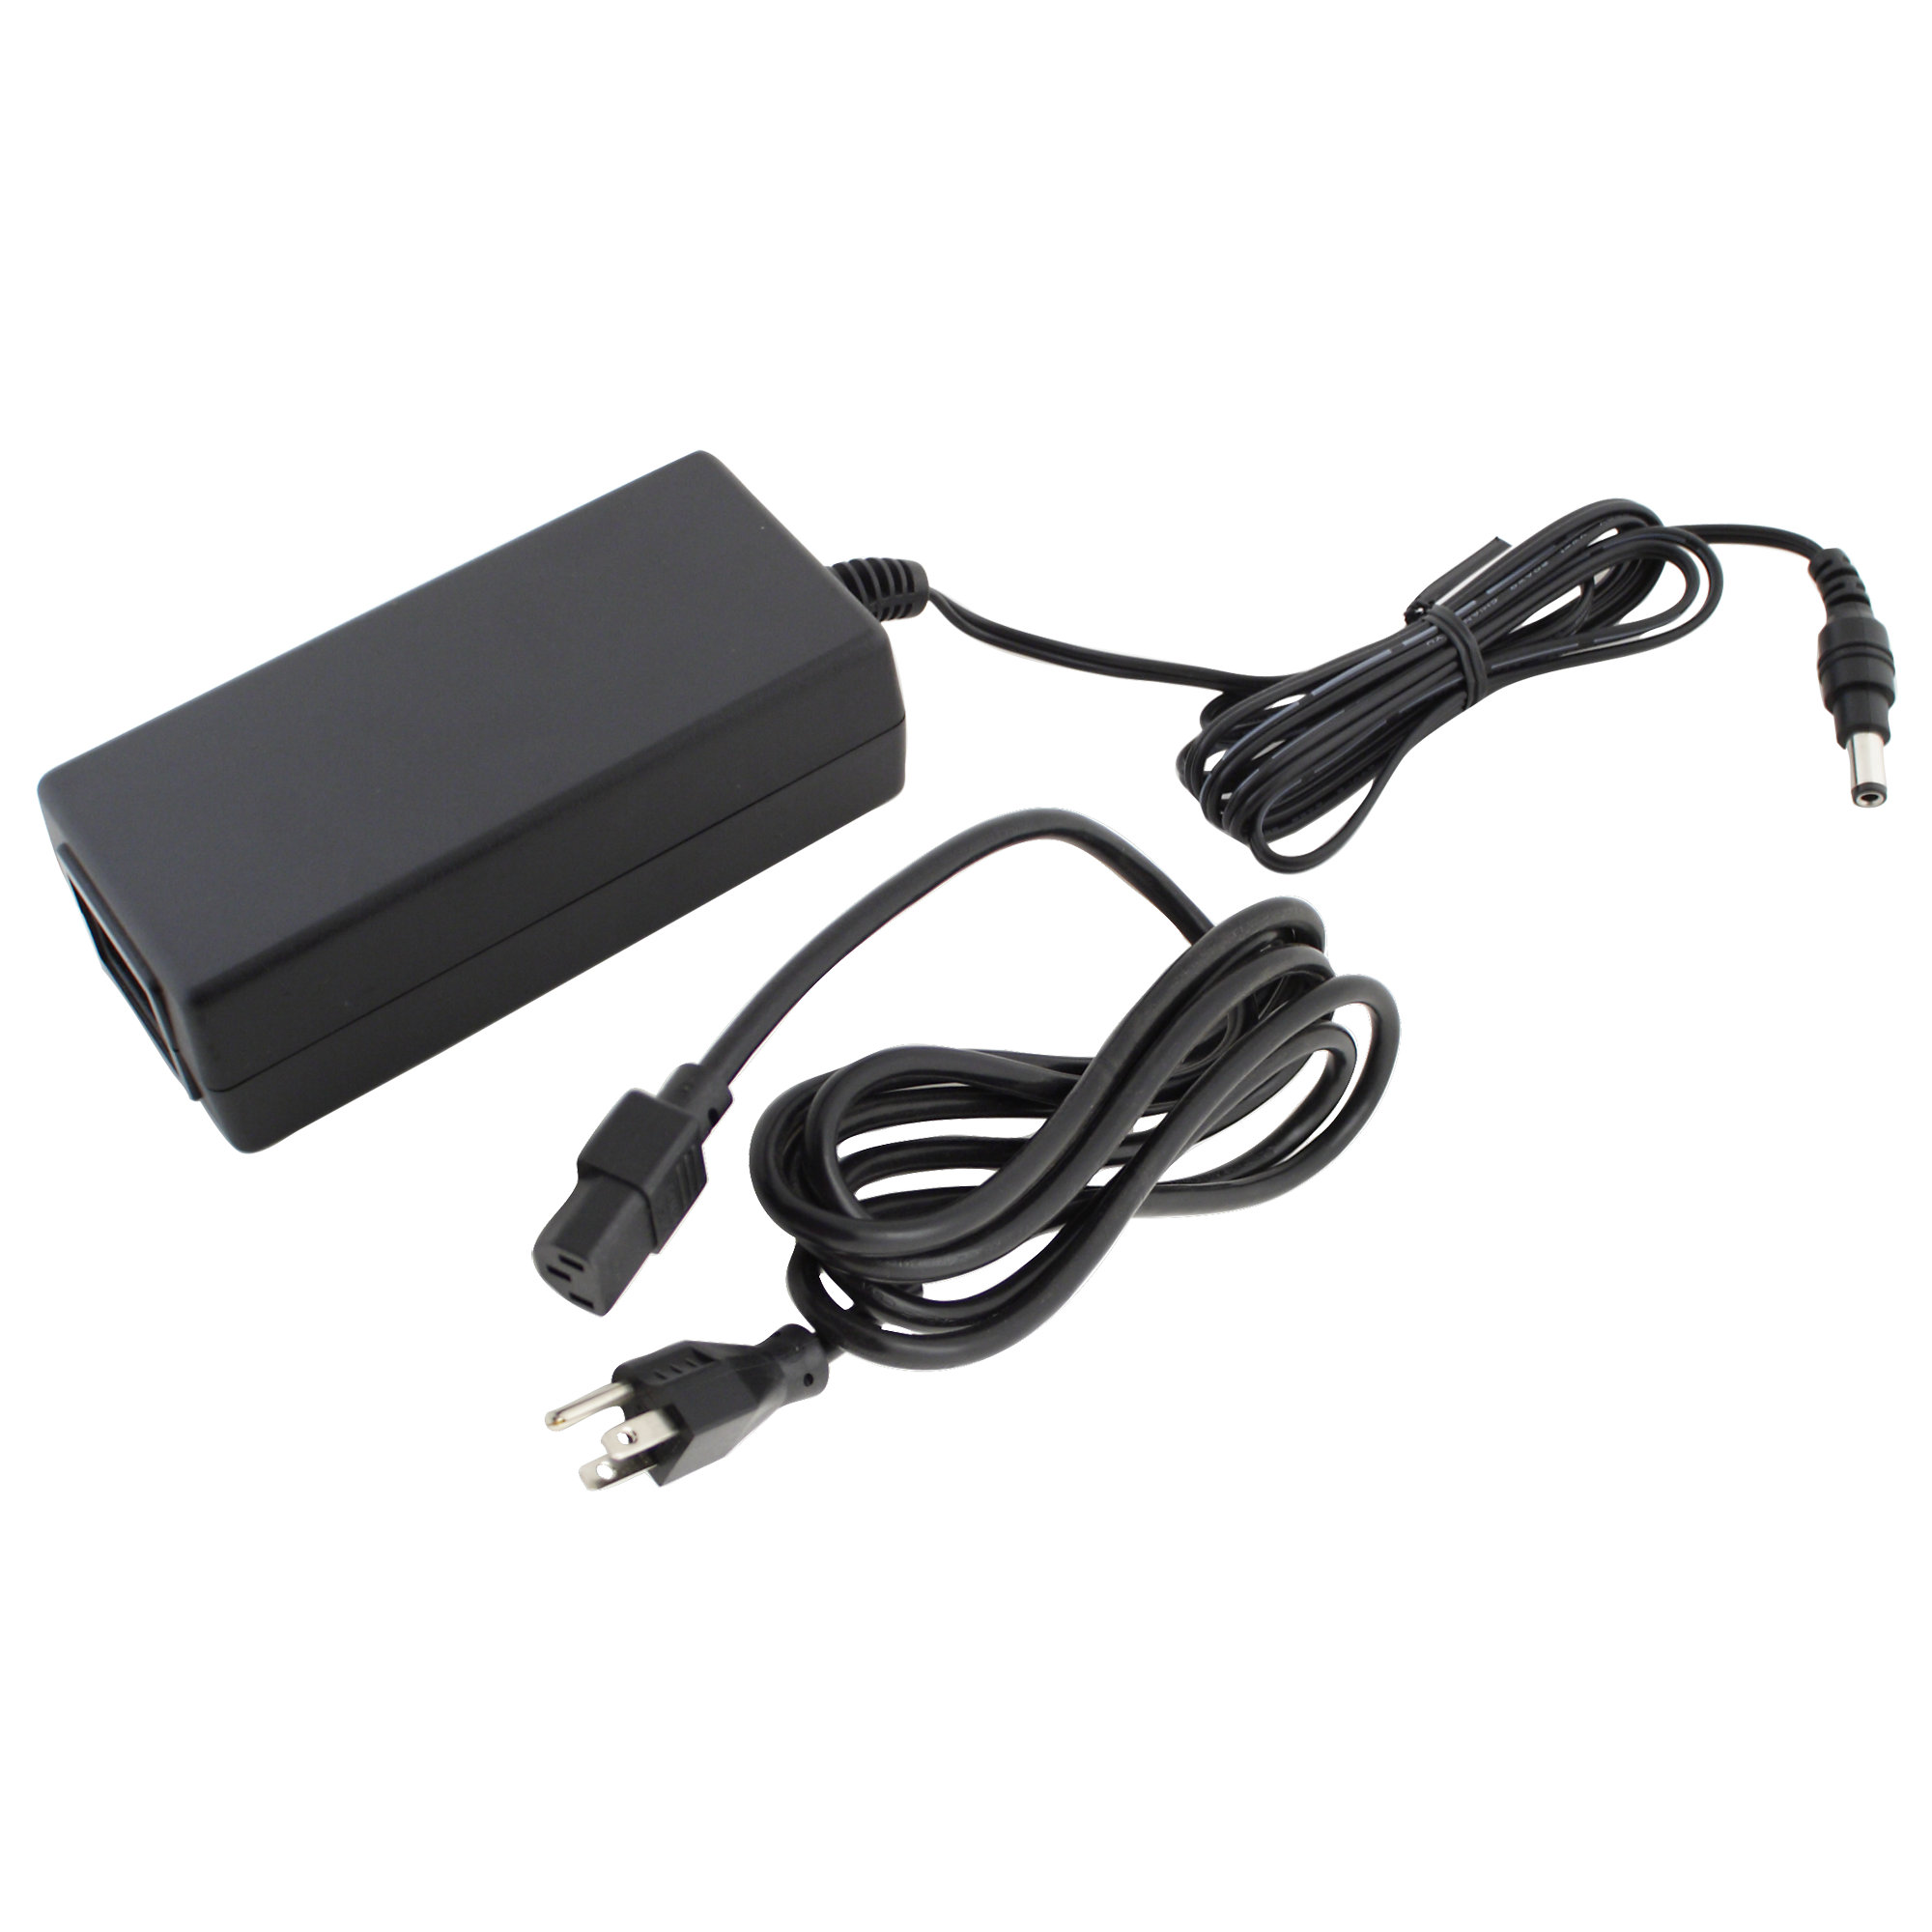 Power Supply and Detachable Power Cord